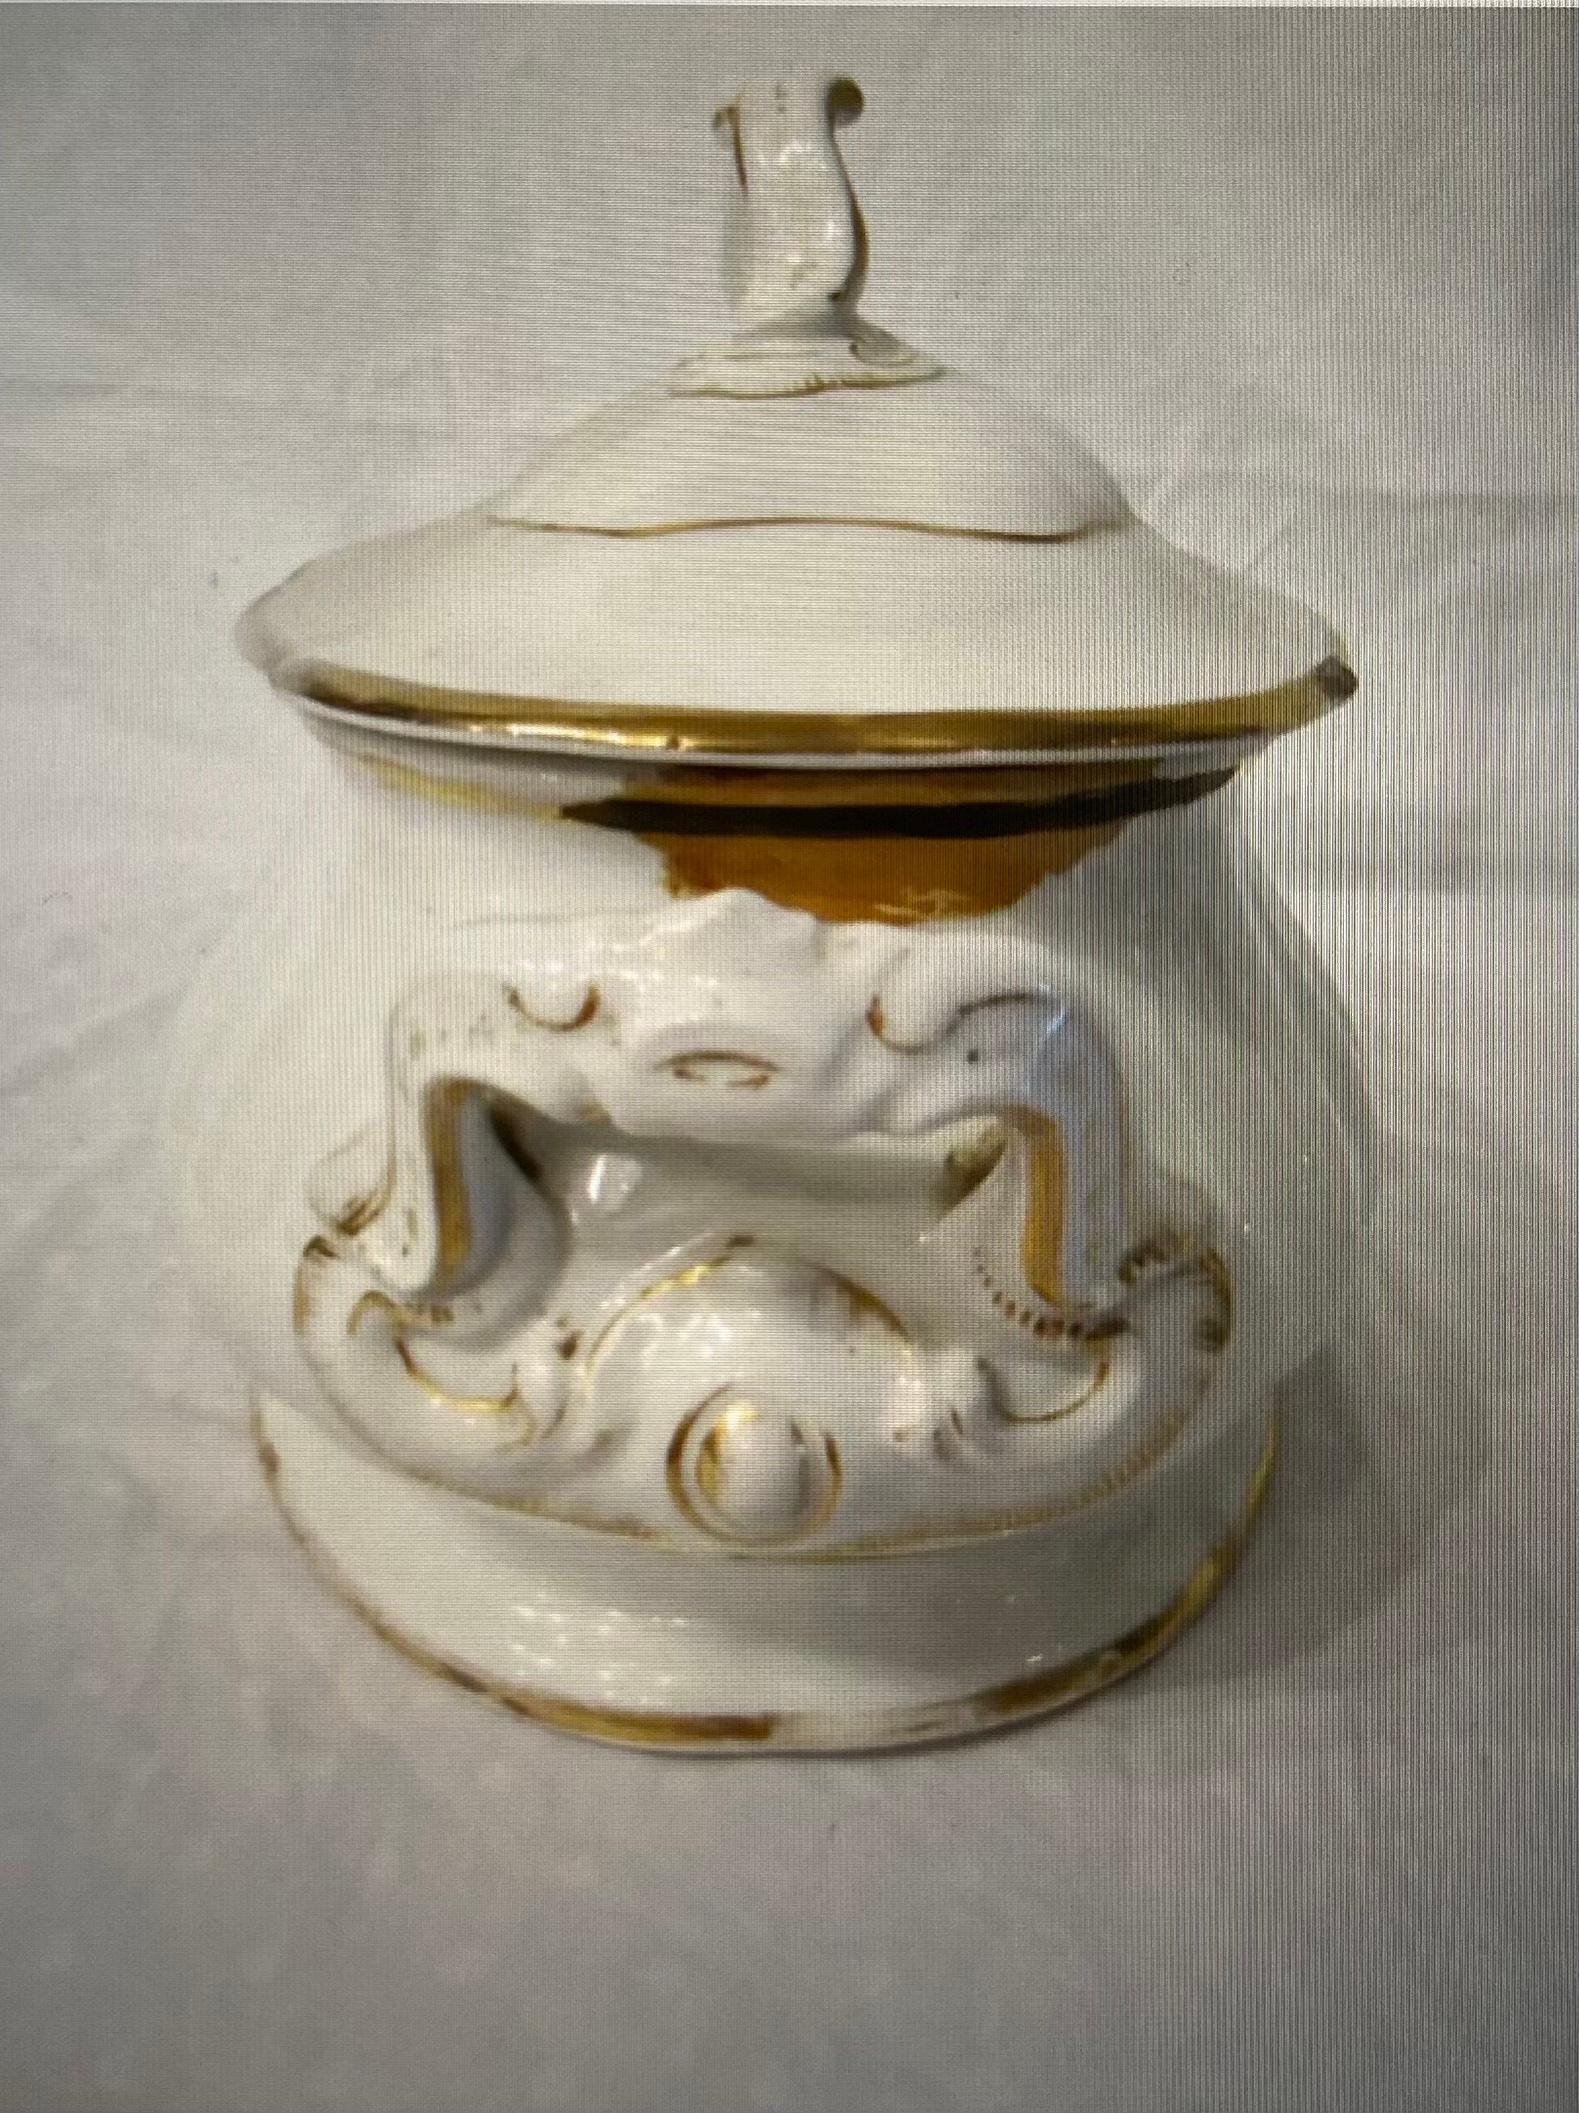 White & Gold Porcelain Soup Tureen In Fair Condition For Sale In East Hampton, NY